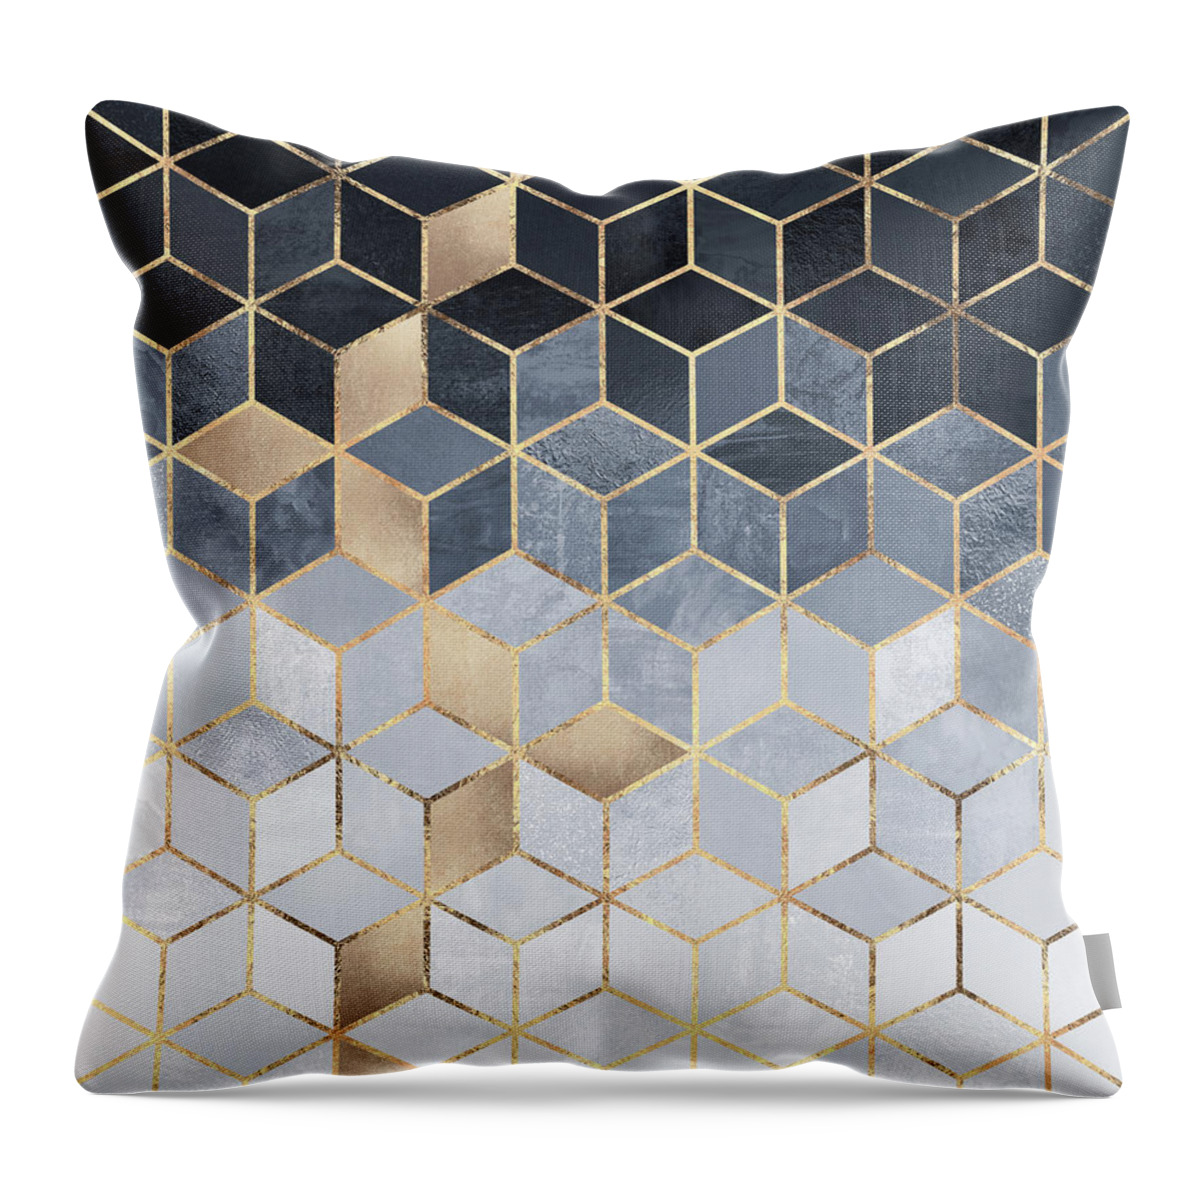 Cube Throw Pillow featuring the digital art Soft Blue Gradient Cubes by Elisabeth Fredriksson